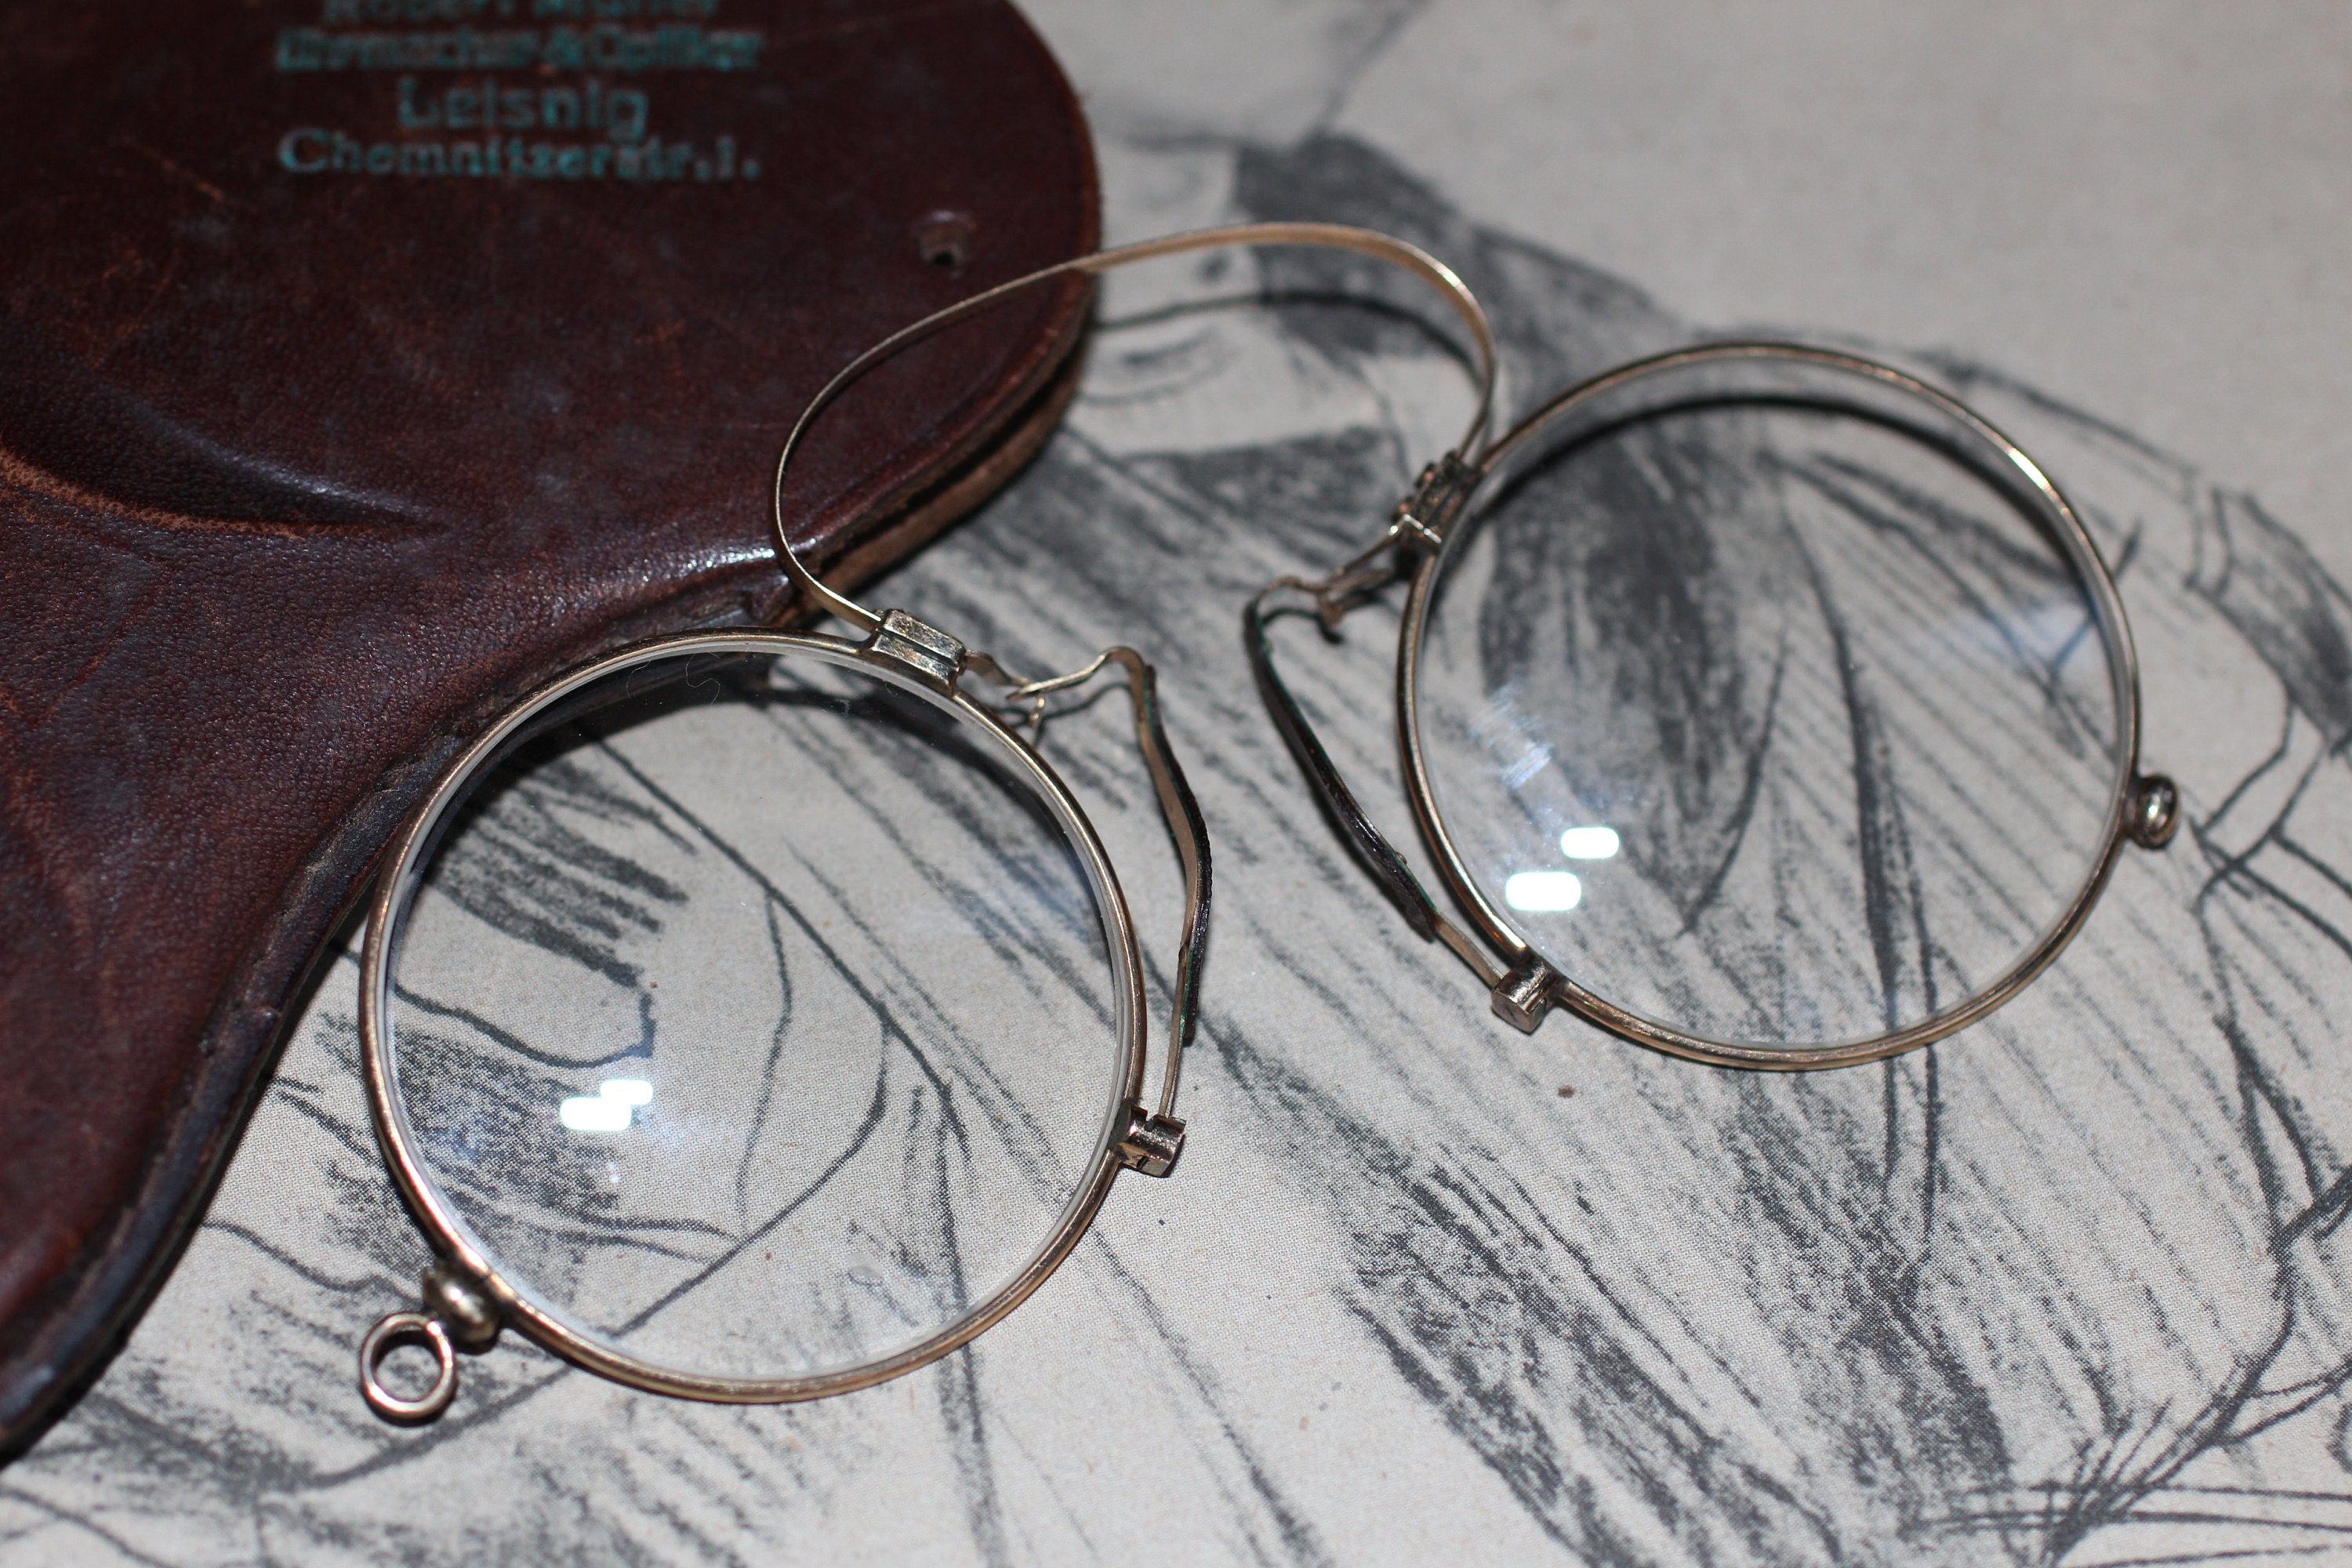 Pince-nez Glasses – Tiny Tuesdays at the Fall River Historical Society